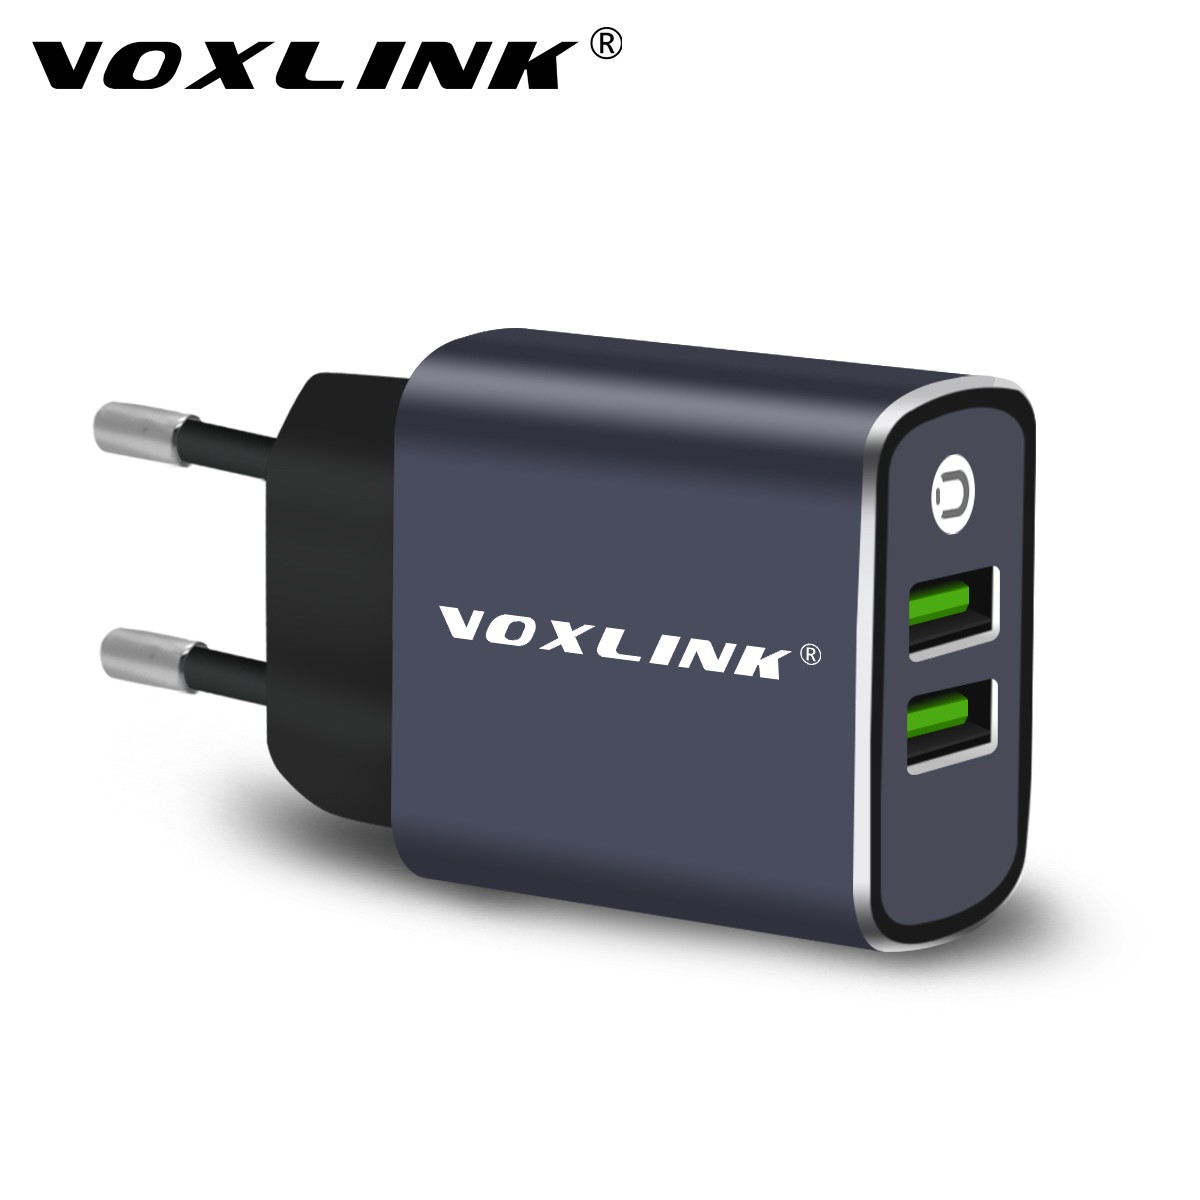 VOXLINK dual usb5V3.1A aluminum alloy wall plug new private model CE certification European regulation with indicator light fast charger Black EU-retail package